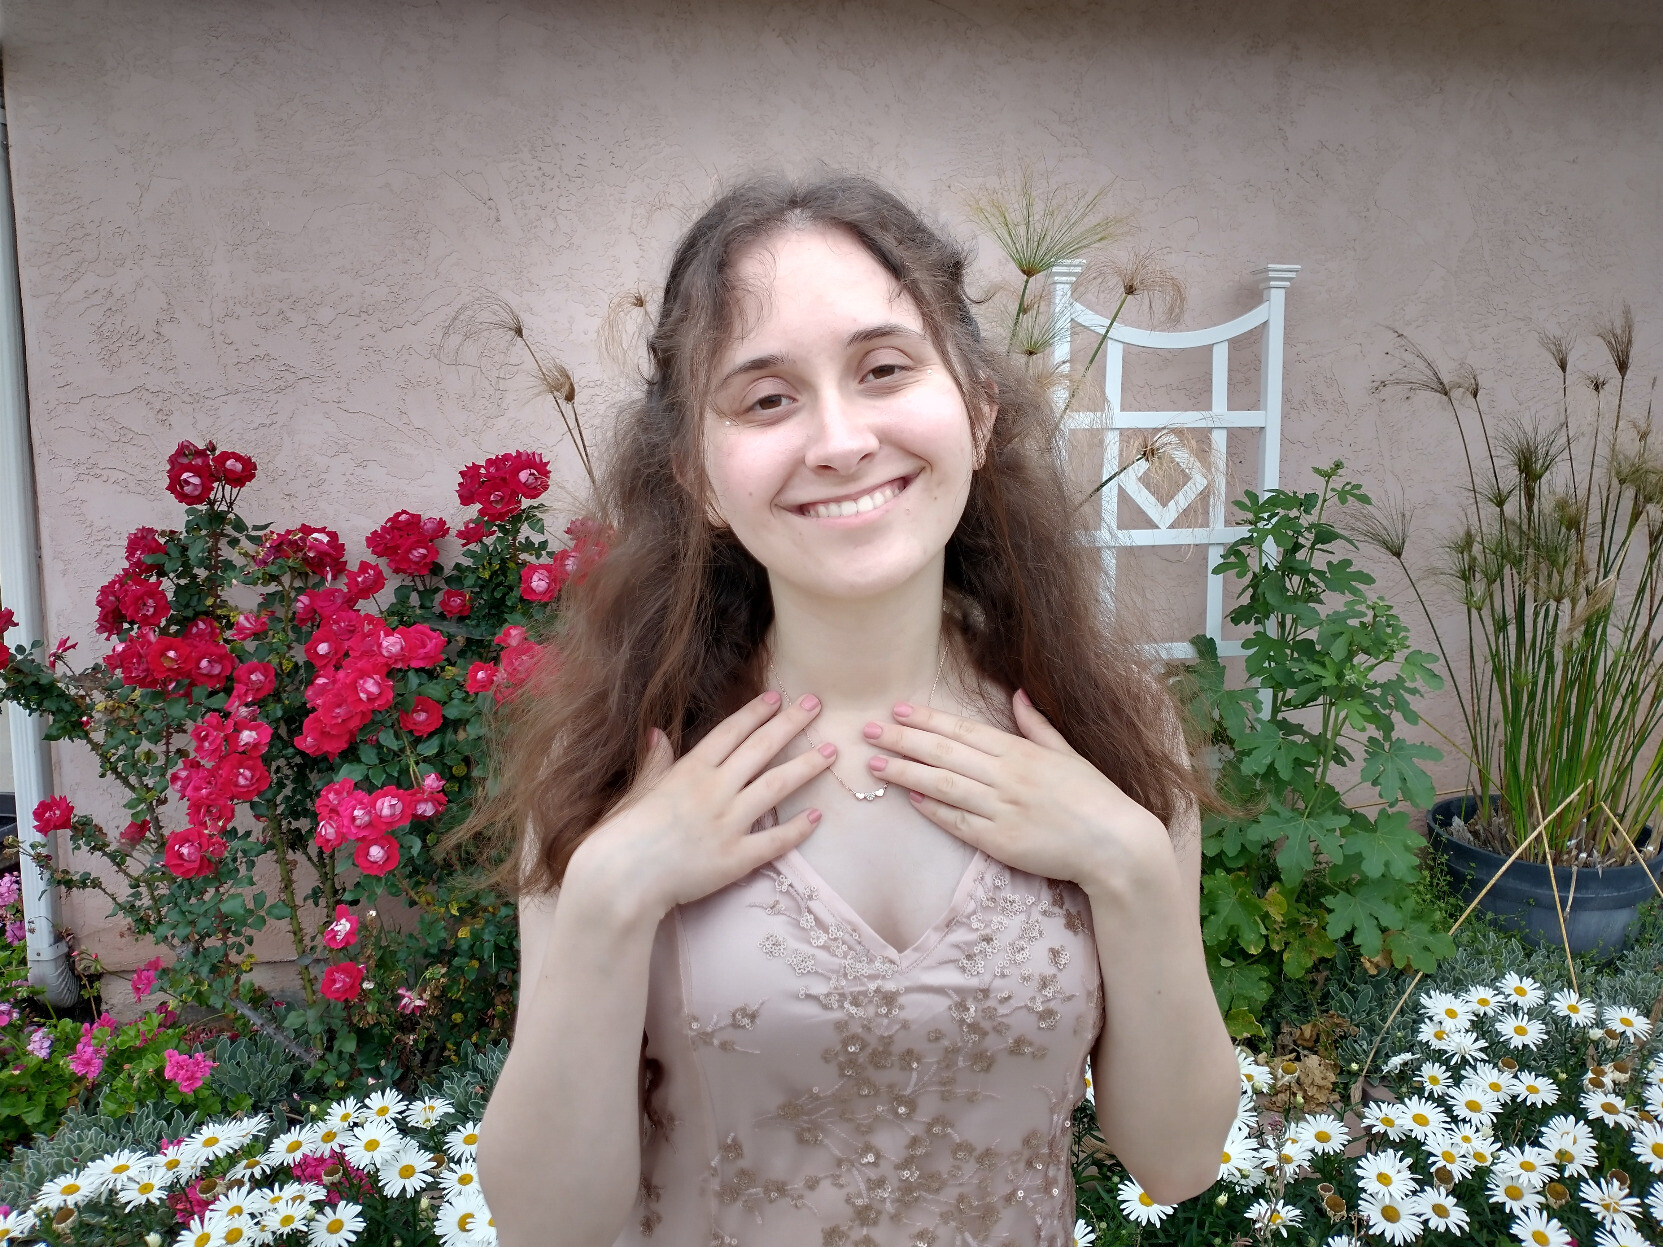 Closeup of a brunette girl (me!) wearing a rose pink dress. Her hands are on her chest and she is wearing a heart necklace.